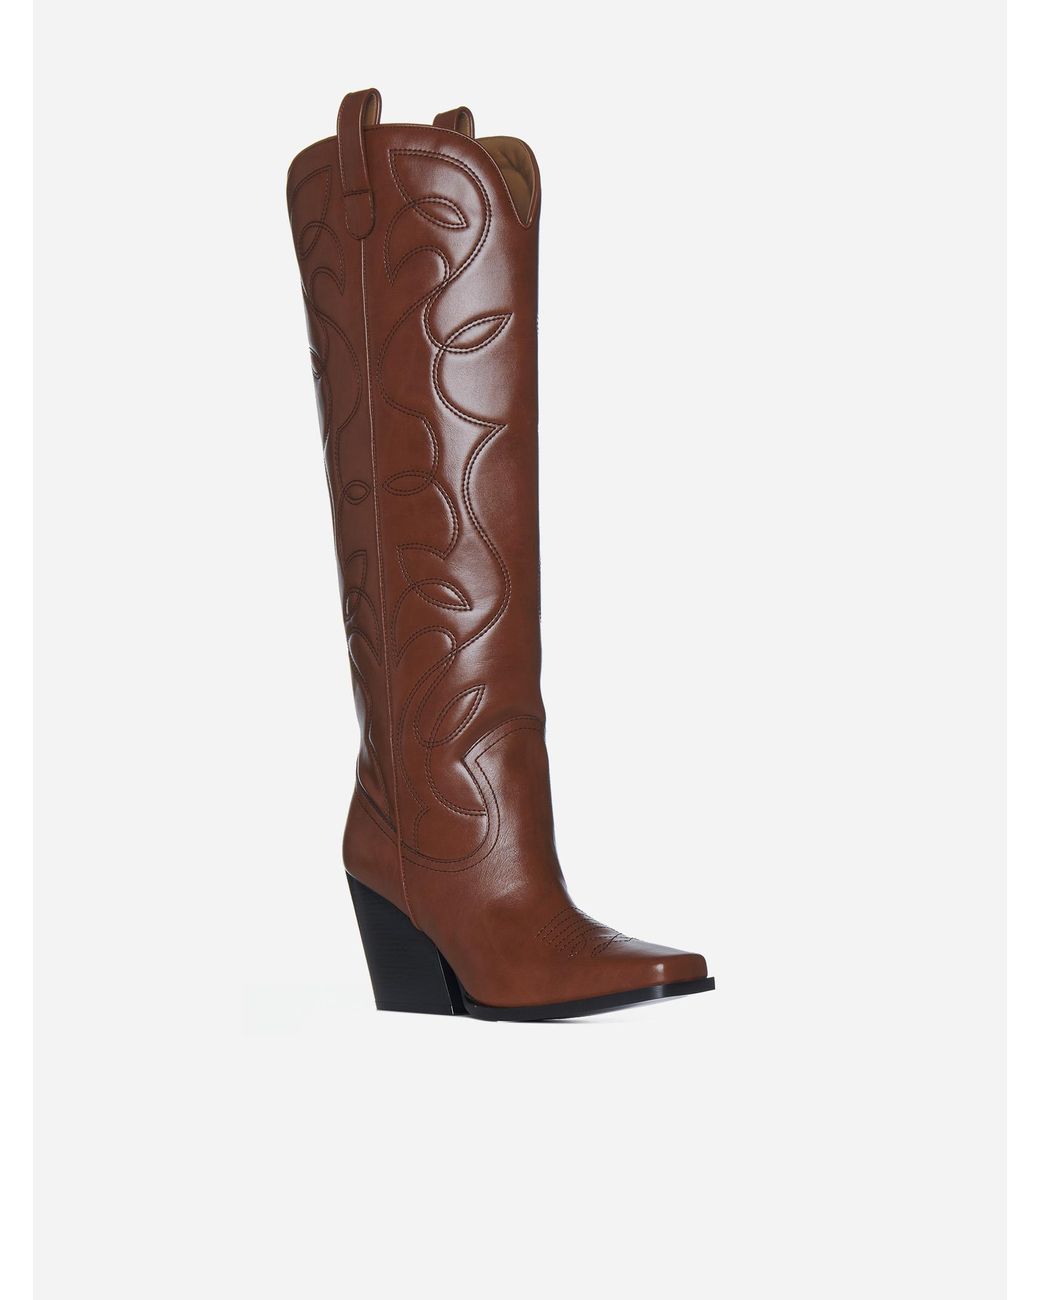 Stella McCartney Cowboy Cloudy Alter Mat Boots in Brown | Lyst